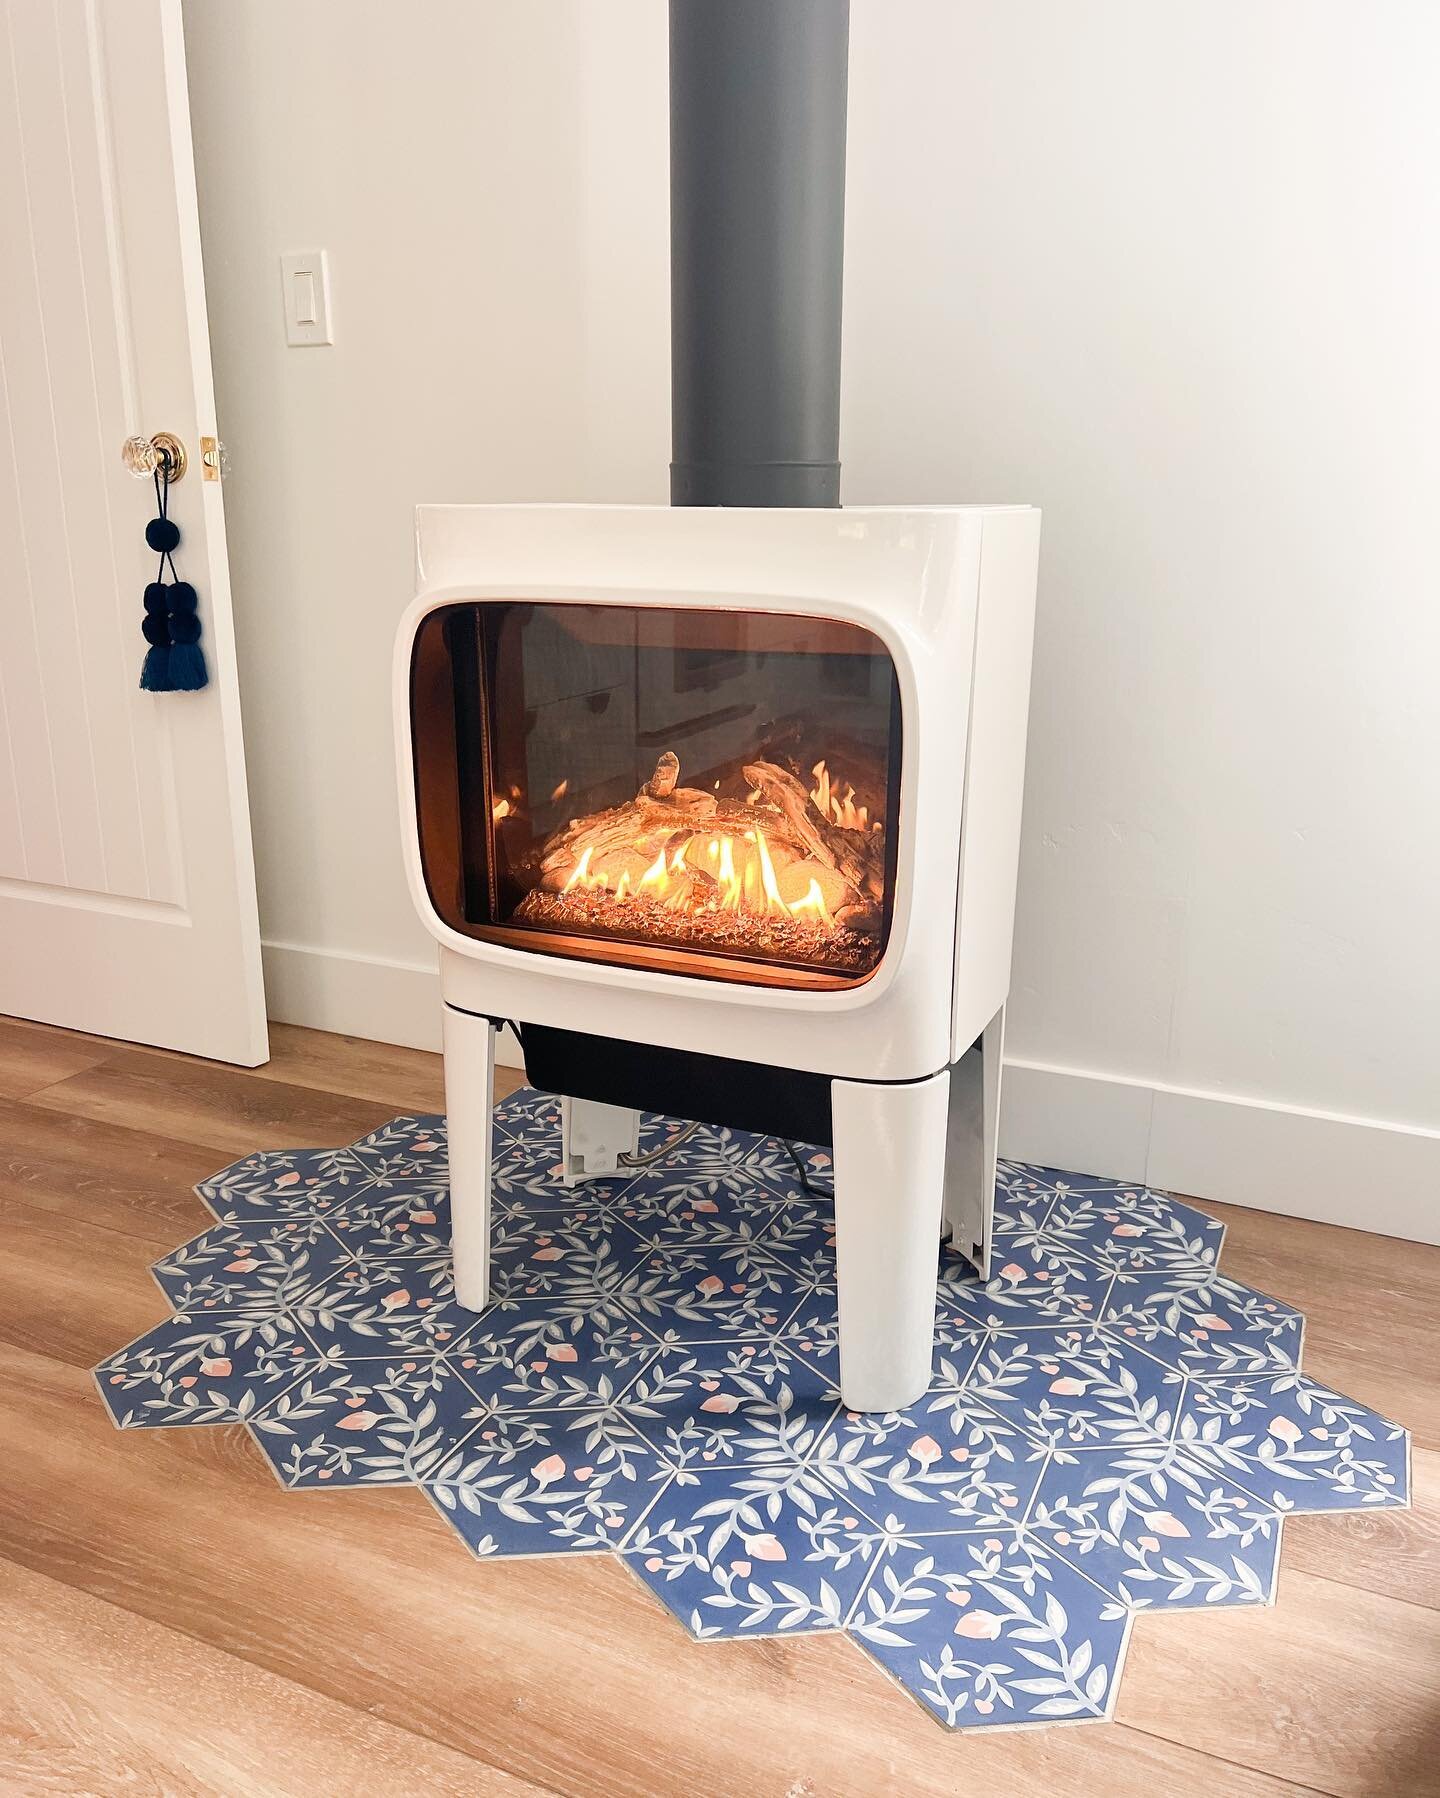 Check out this super cute fire stove from our #lunaaduproject 

We couldn't resist escaping to the snow for ski week - kids are already enjoying the change in scenery!